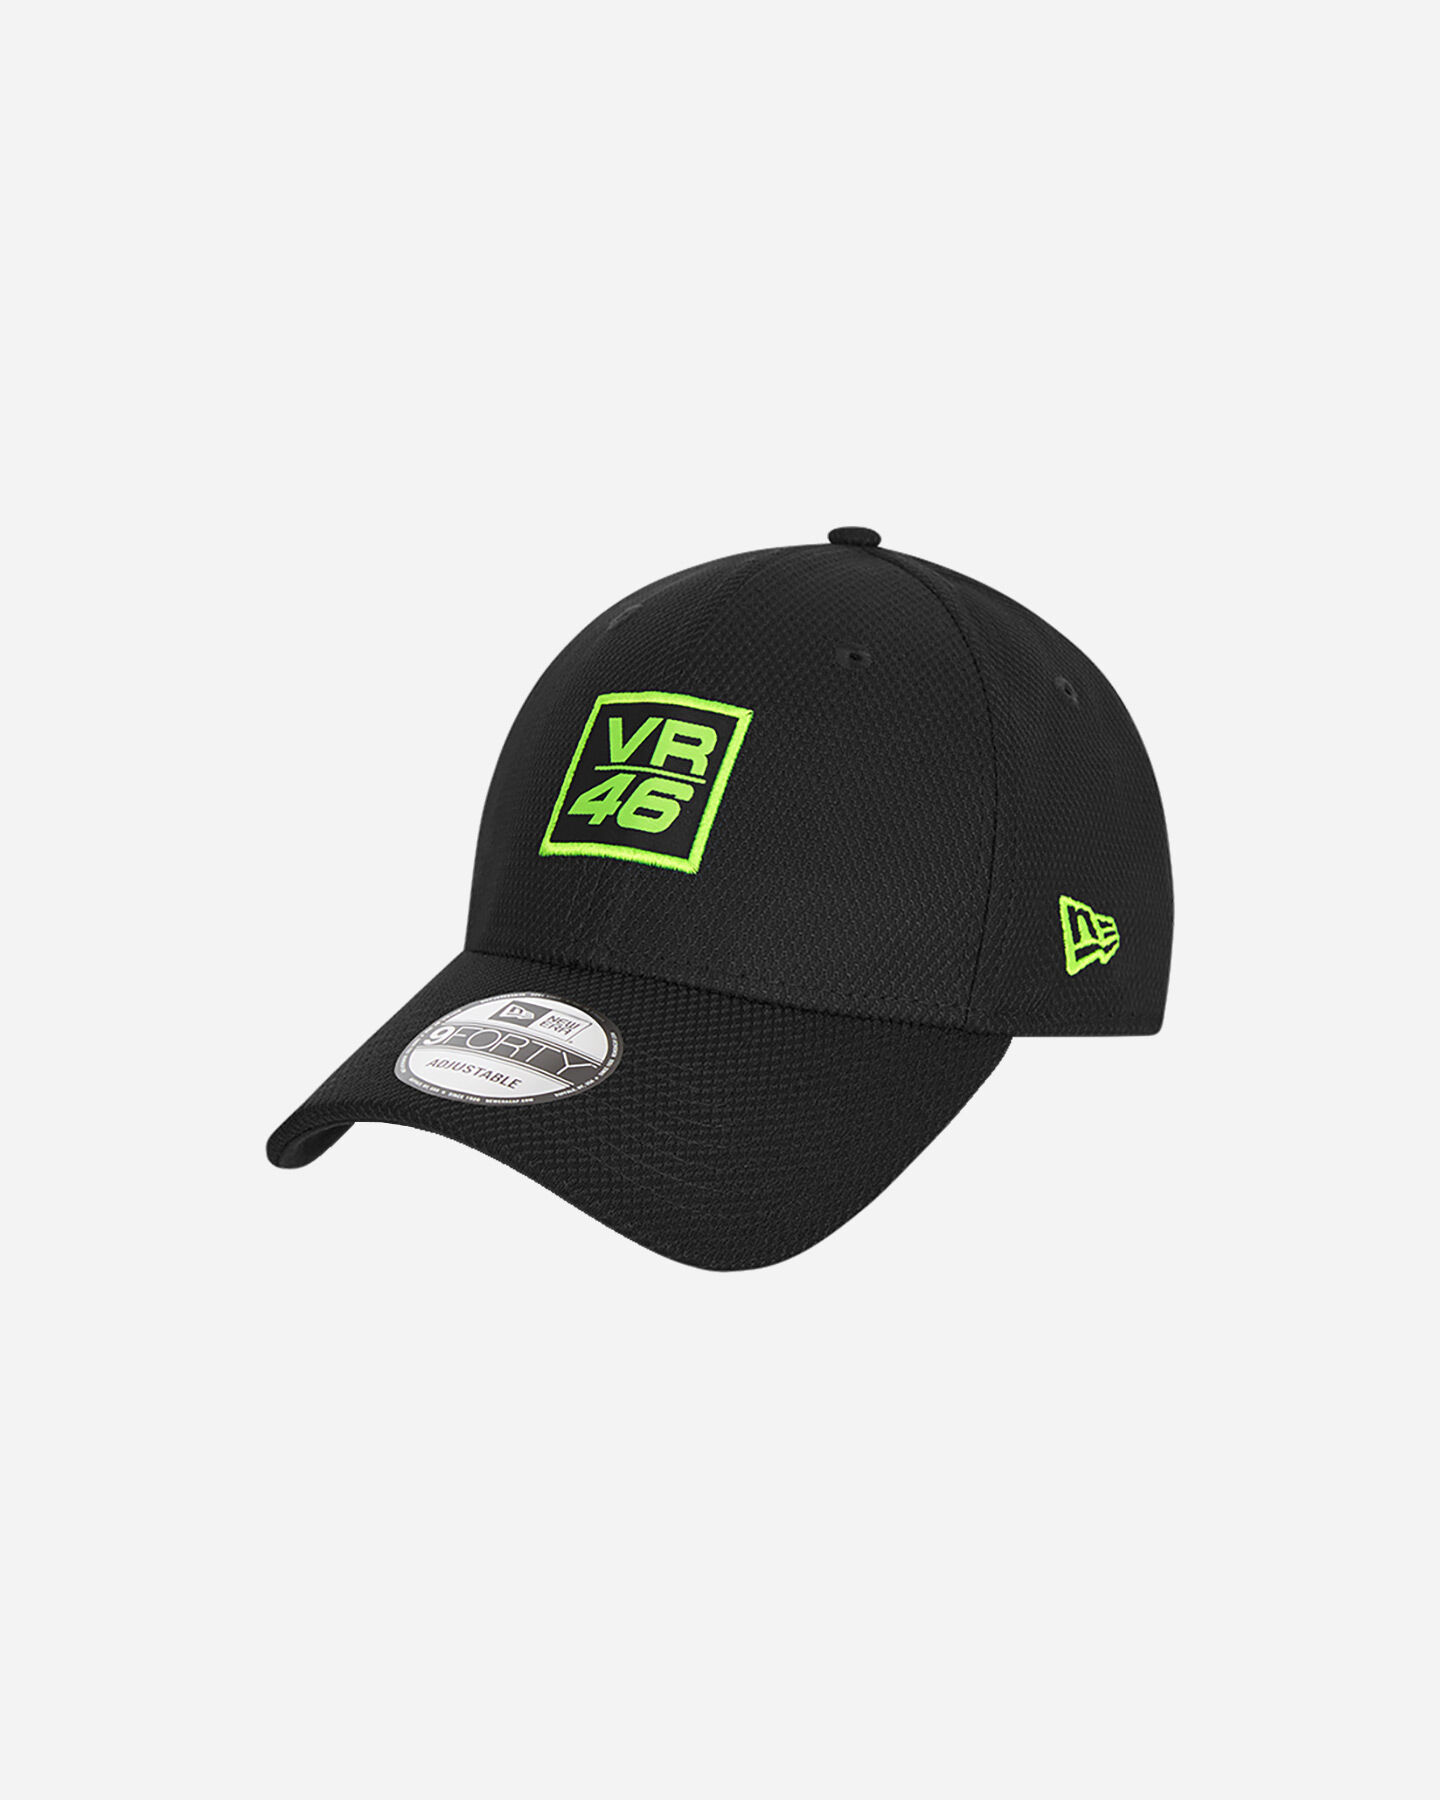  Cappellino NEW ERA 9FORTY RACING VR46  S5340824|001|OSFM scatto 0